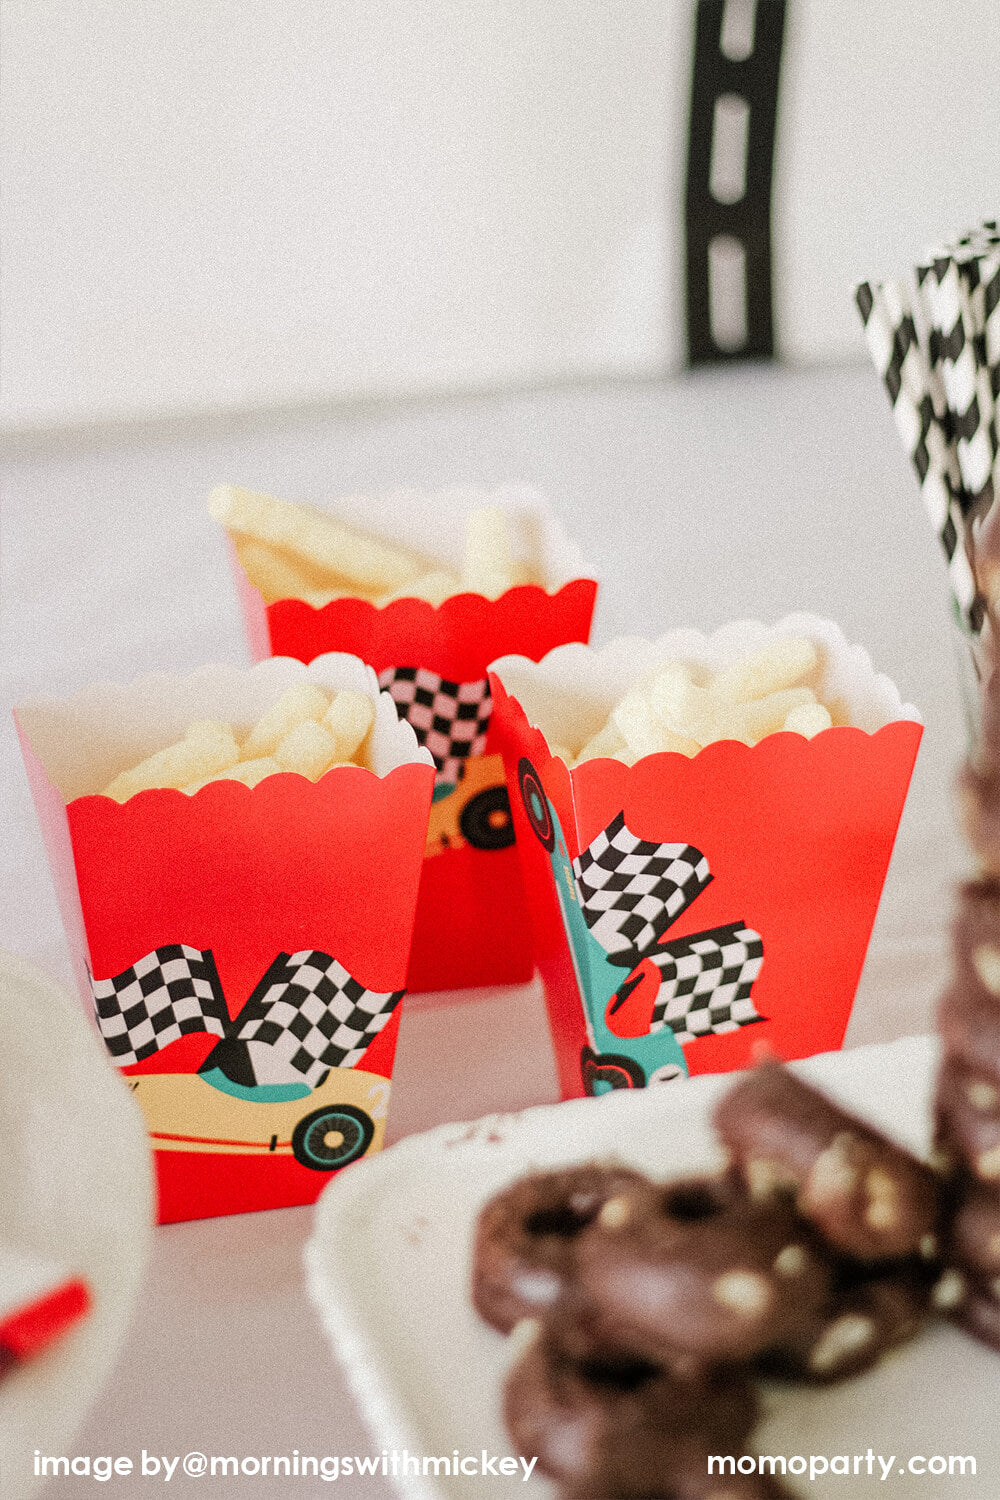 Race Car-themed Birthday party table close-up of, Red paper cups decorated with Merrilulu Race Car Gift Bag Stickers with chips as party snacks.These stickers feature vintage red, blue and yellow race car with checkerboard flag design. peel and stick on a paper bag, or popcorn cups ready for a modern race car party decoration. This modern Race Car Birthday party hosted by Momo Party with Mornings-with-Mickey is so fun for kids who love Disney Cars, Race Car and 2nd birthday